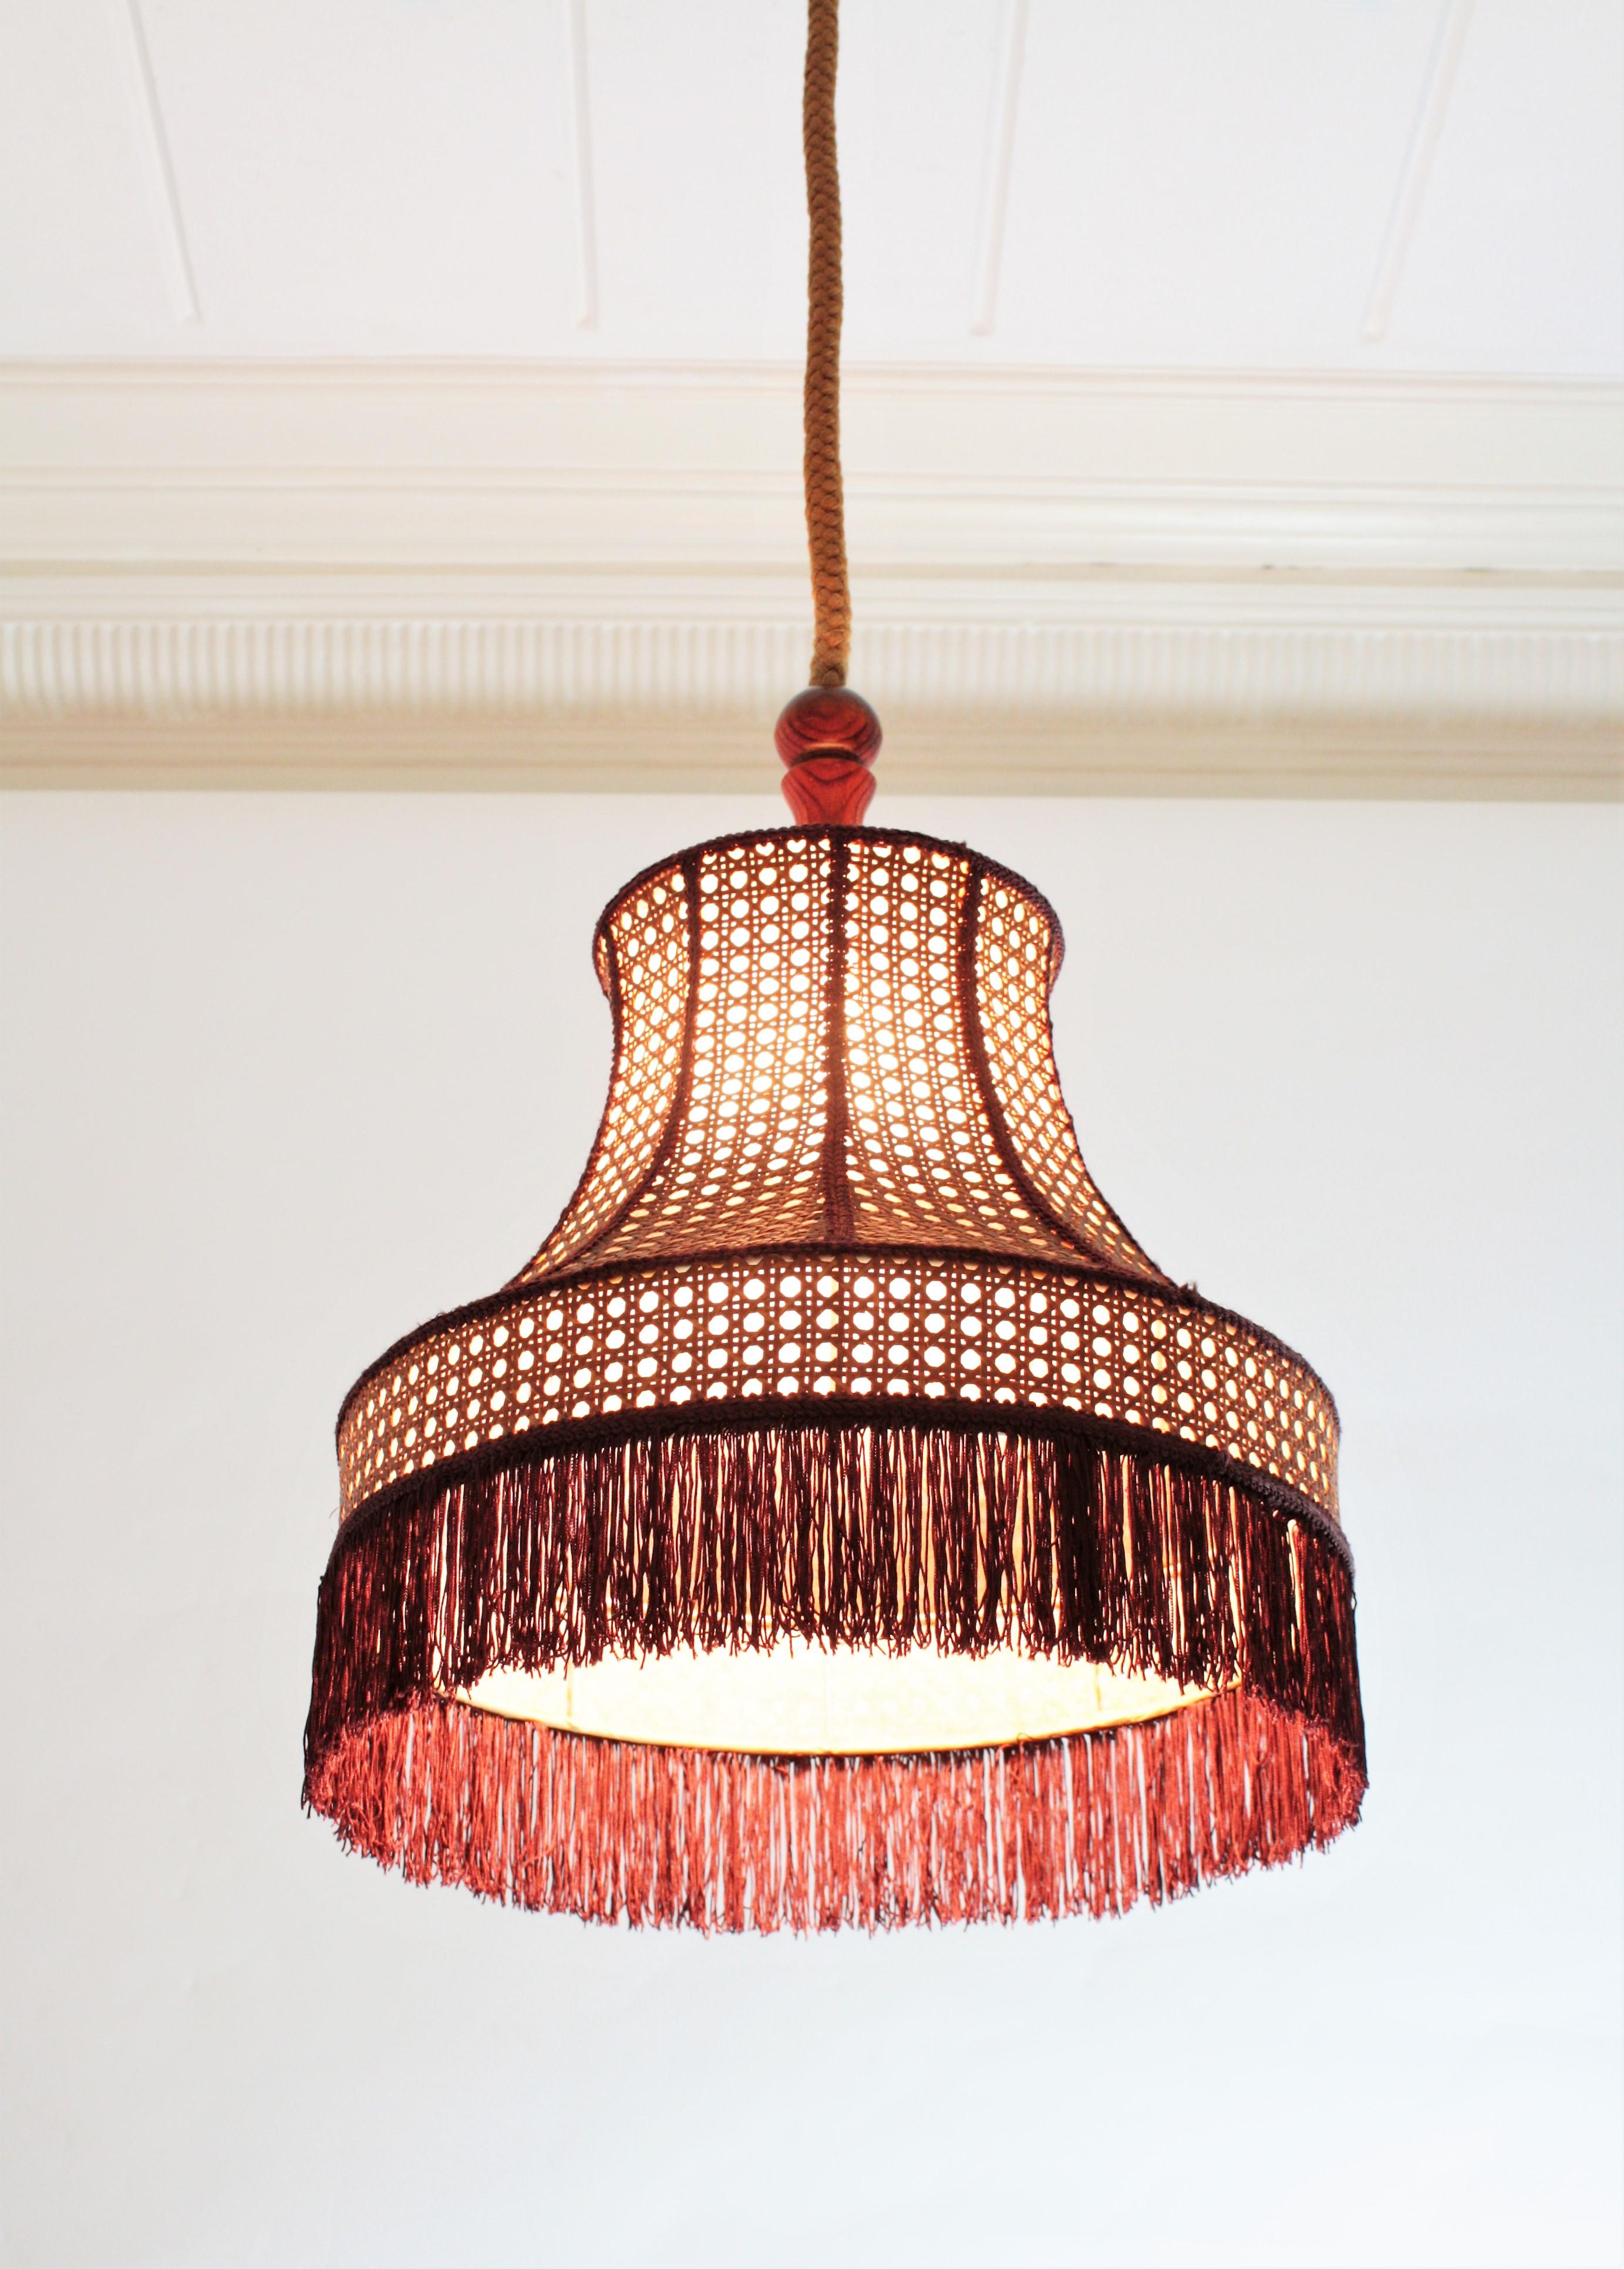 Rattan Wicker Pendant Hanging Lamp with Pagoda Shape and Fringed Bottom 11